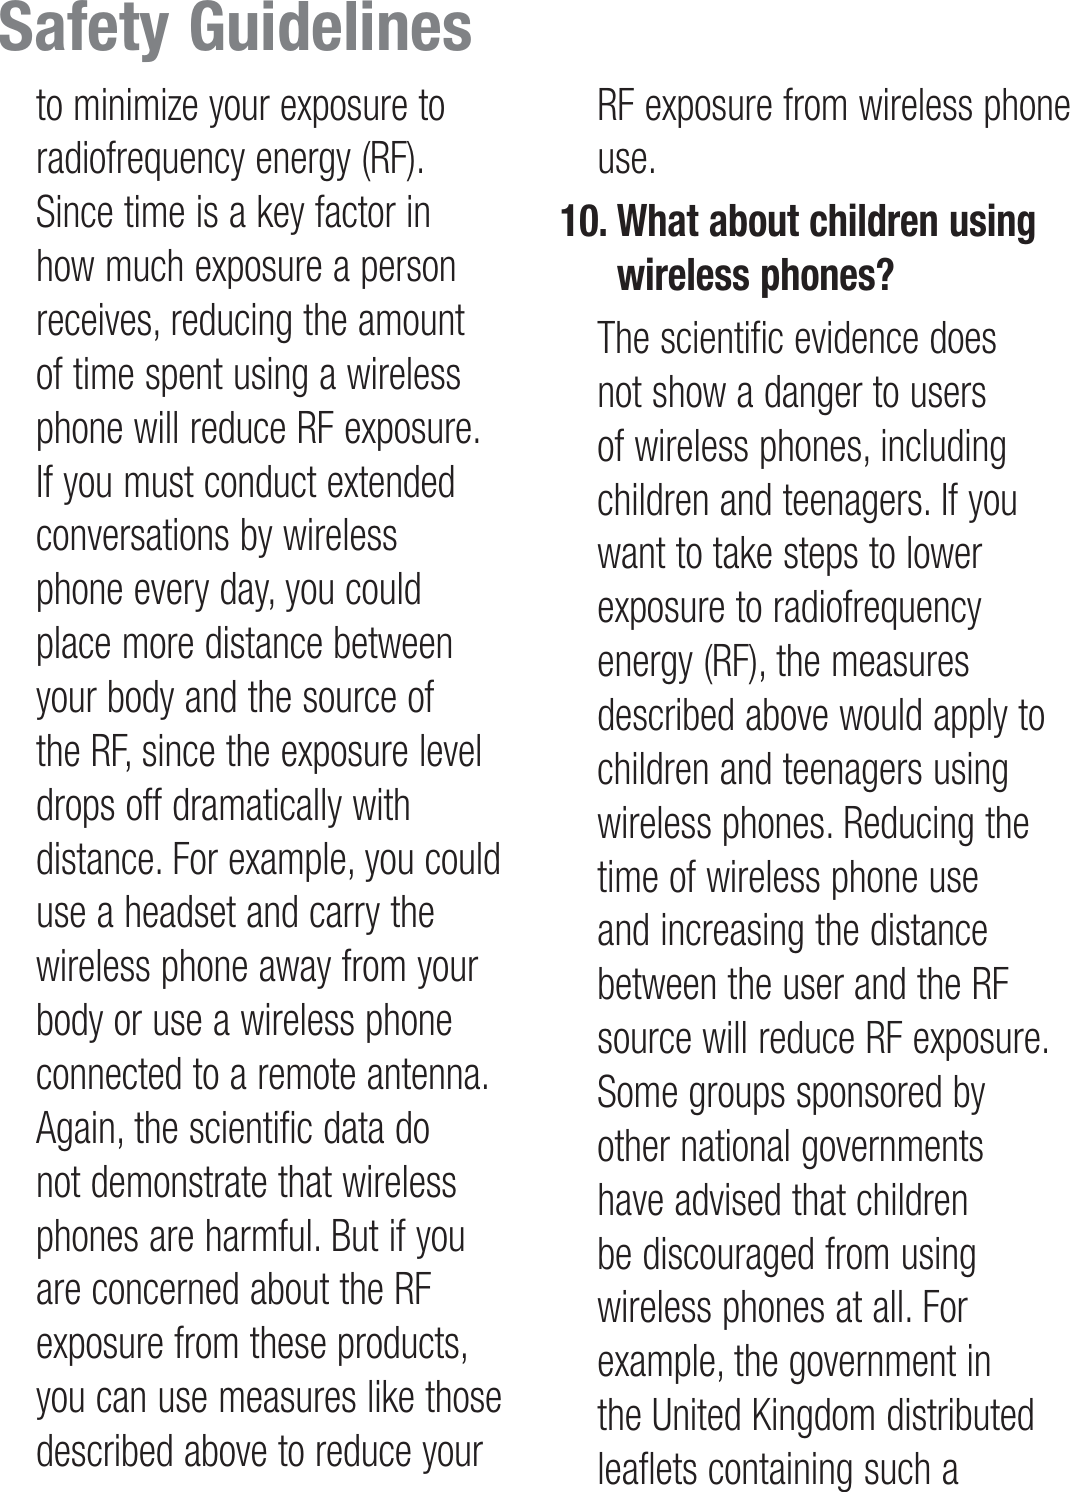 to minimize your exposure to radiofrequency energy (RF). Since time is a key factor in how much exposure a person receives, reducing the amount of time spent using a wireless phone will reduce RF exposure. If you must conduct extended conversations by wireless phone every day, you could place more distance between your body and the source of the RF, since the exposure level drops off dramatically with distance. For example, you could use a headset and carry the wireless phone away from your body or use a wireless phone connected to a remote antenna. Again, the scientific data do not demonstrate that wireless phones are harmful. But if you are concerned about the RF exposure from these products, you can use measures like those described above to reduce your RF exposure from wireless phone use.10.  What about children using wireless phones?   The scientific evidence does not show a danger to users of wireless phones, including children and teenagers. If you want to take steps to lower exposure to radiofrequency energy (RF), the measures described above would apply to children and teenagers using wireless phones. Reducing the time of wireless phone use and increasing the distance between the user and the RF source will reduce RF exposure. Some groups sponsored by other national governments have advised that children be discouraged from using wireless phones at all. For example, the government in the United Kingdom distributed leaflets containing such a Safety Guidelines